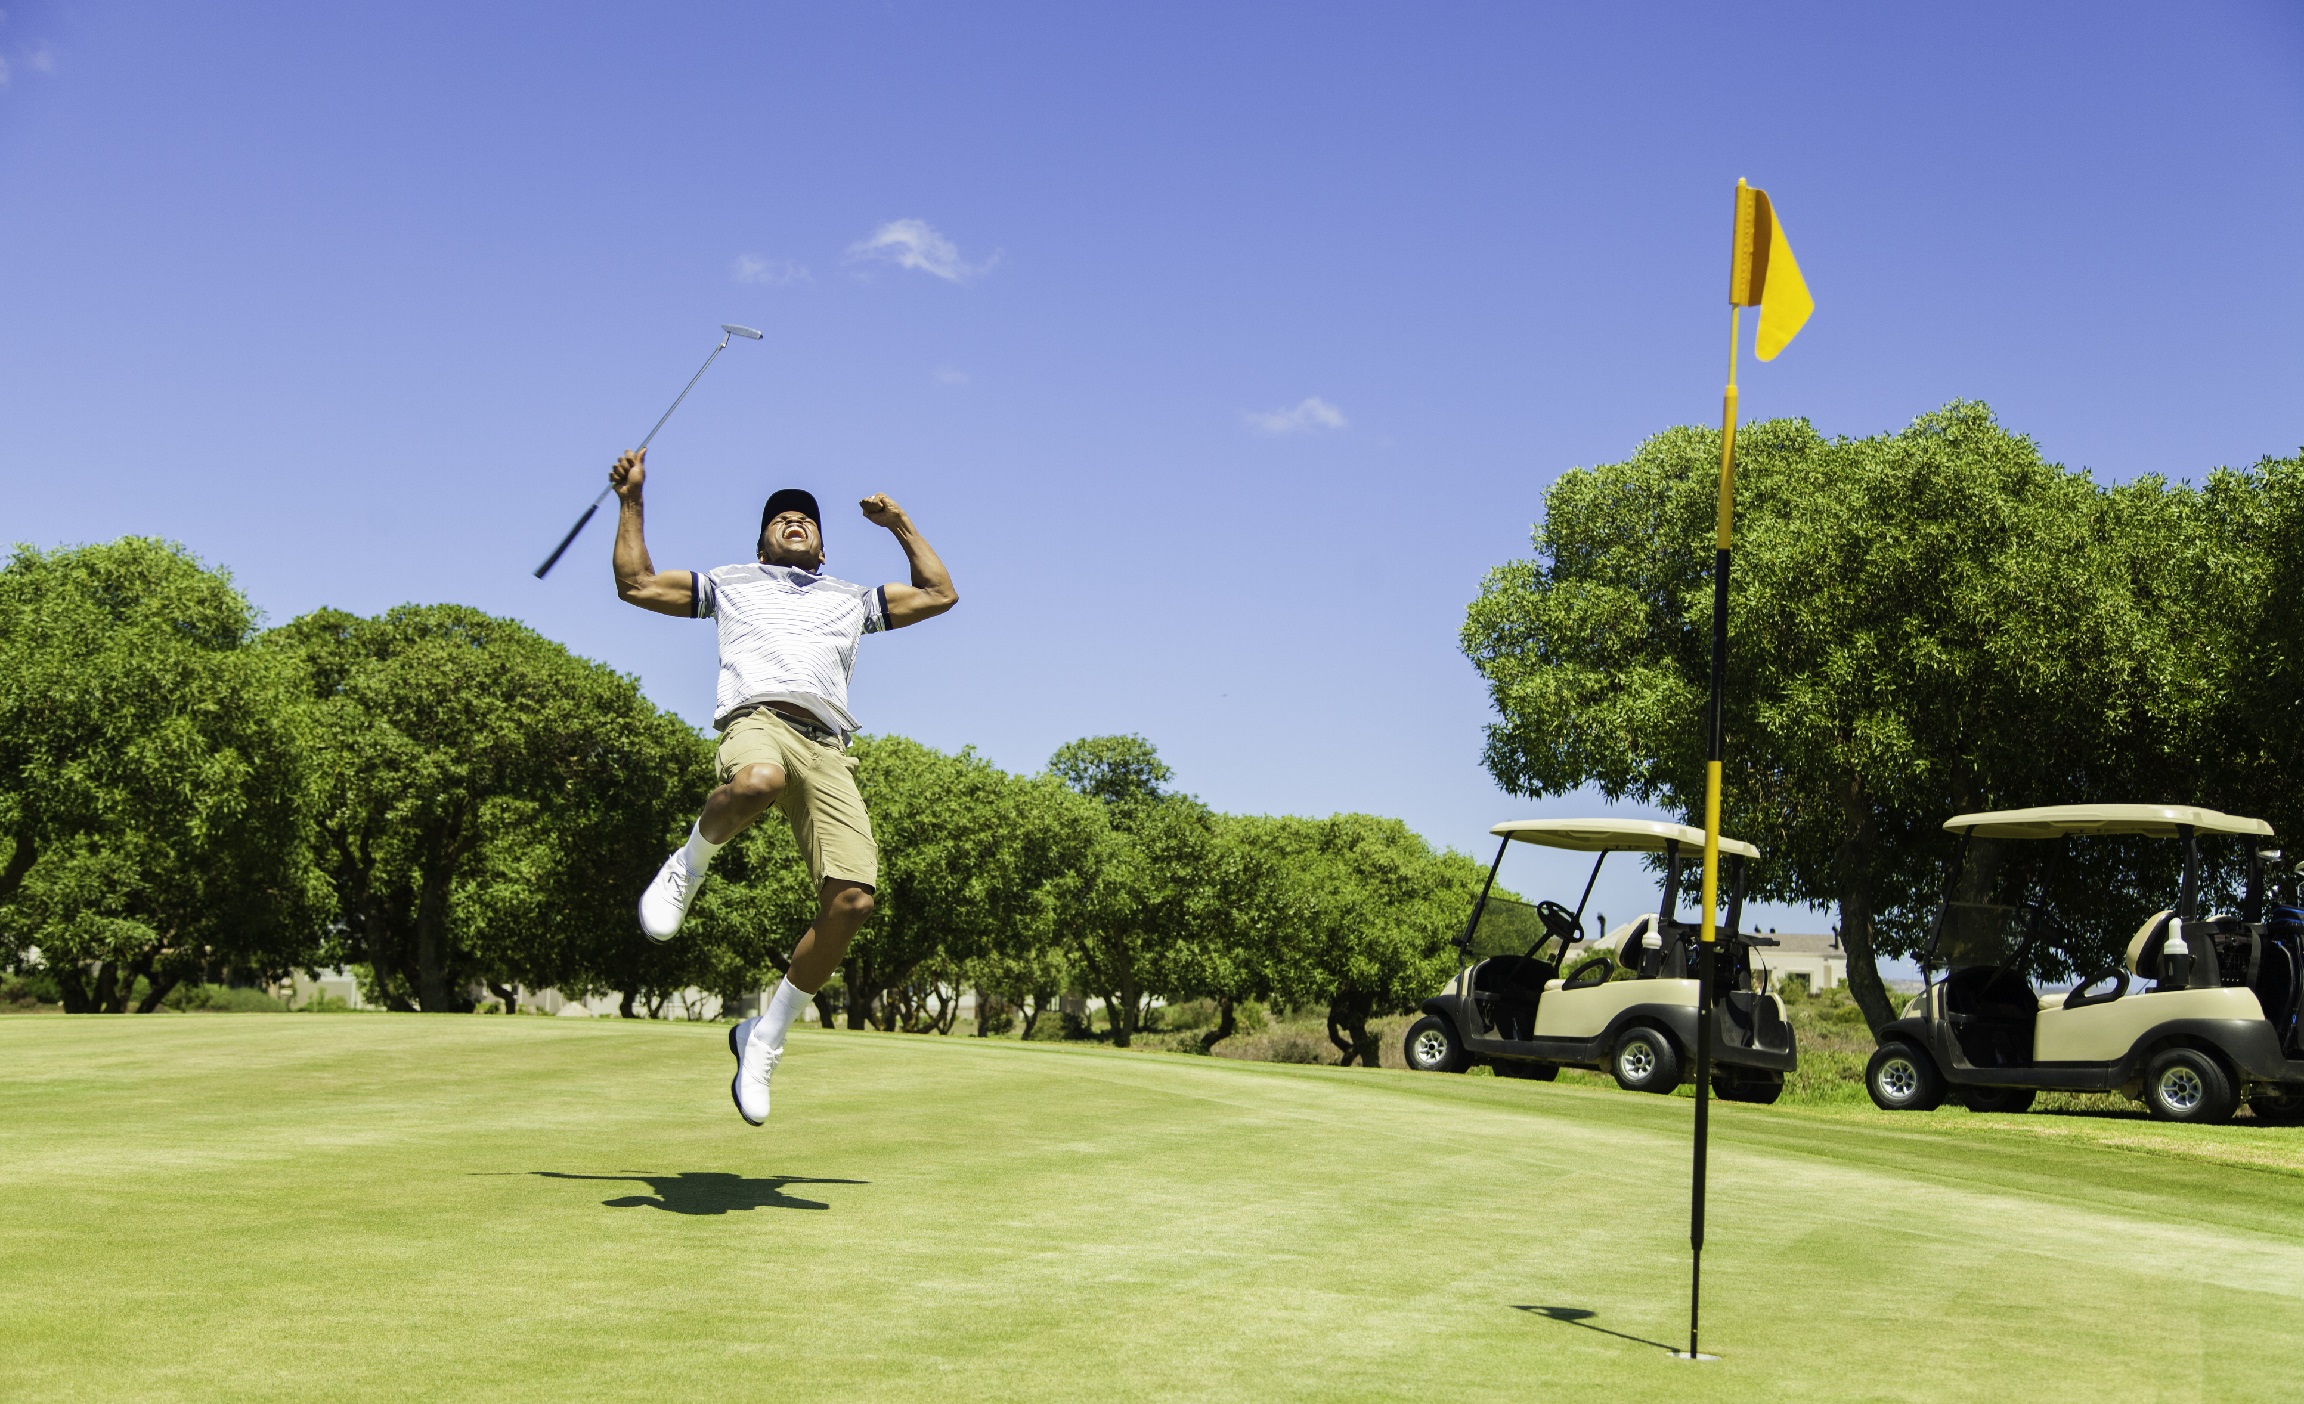 Man jumping in the air in celebration on a golf course